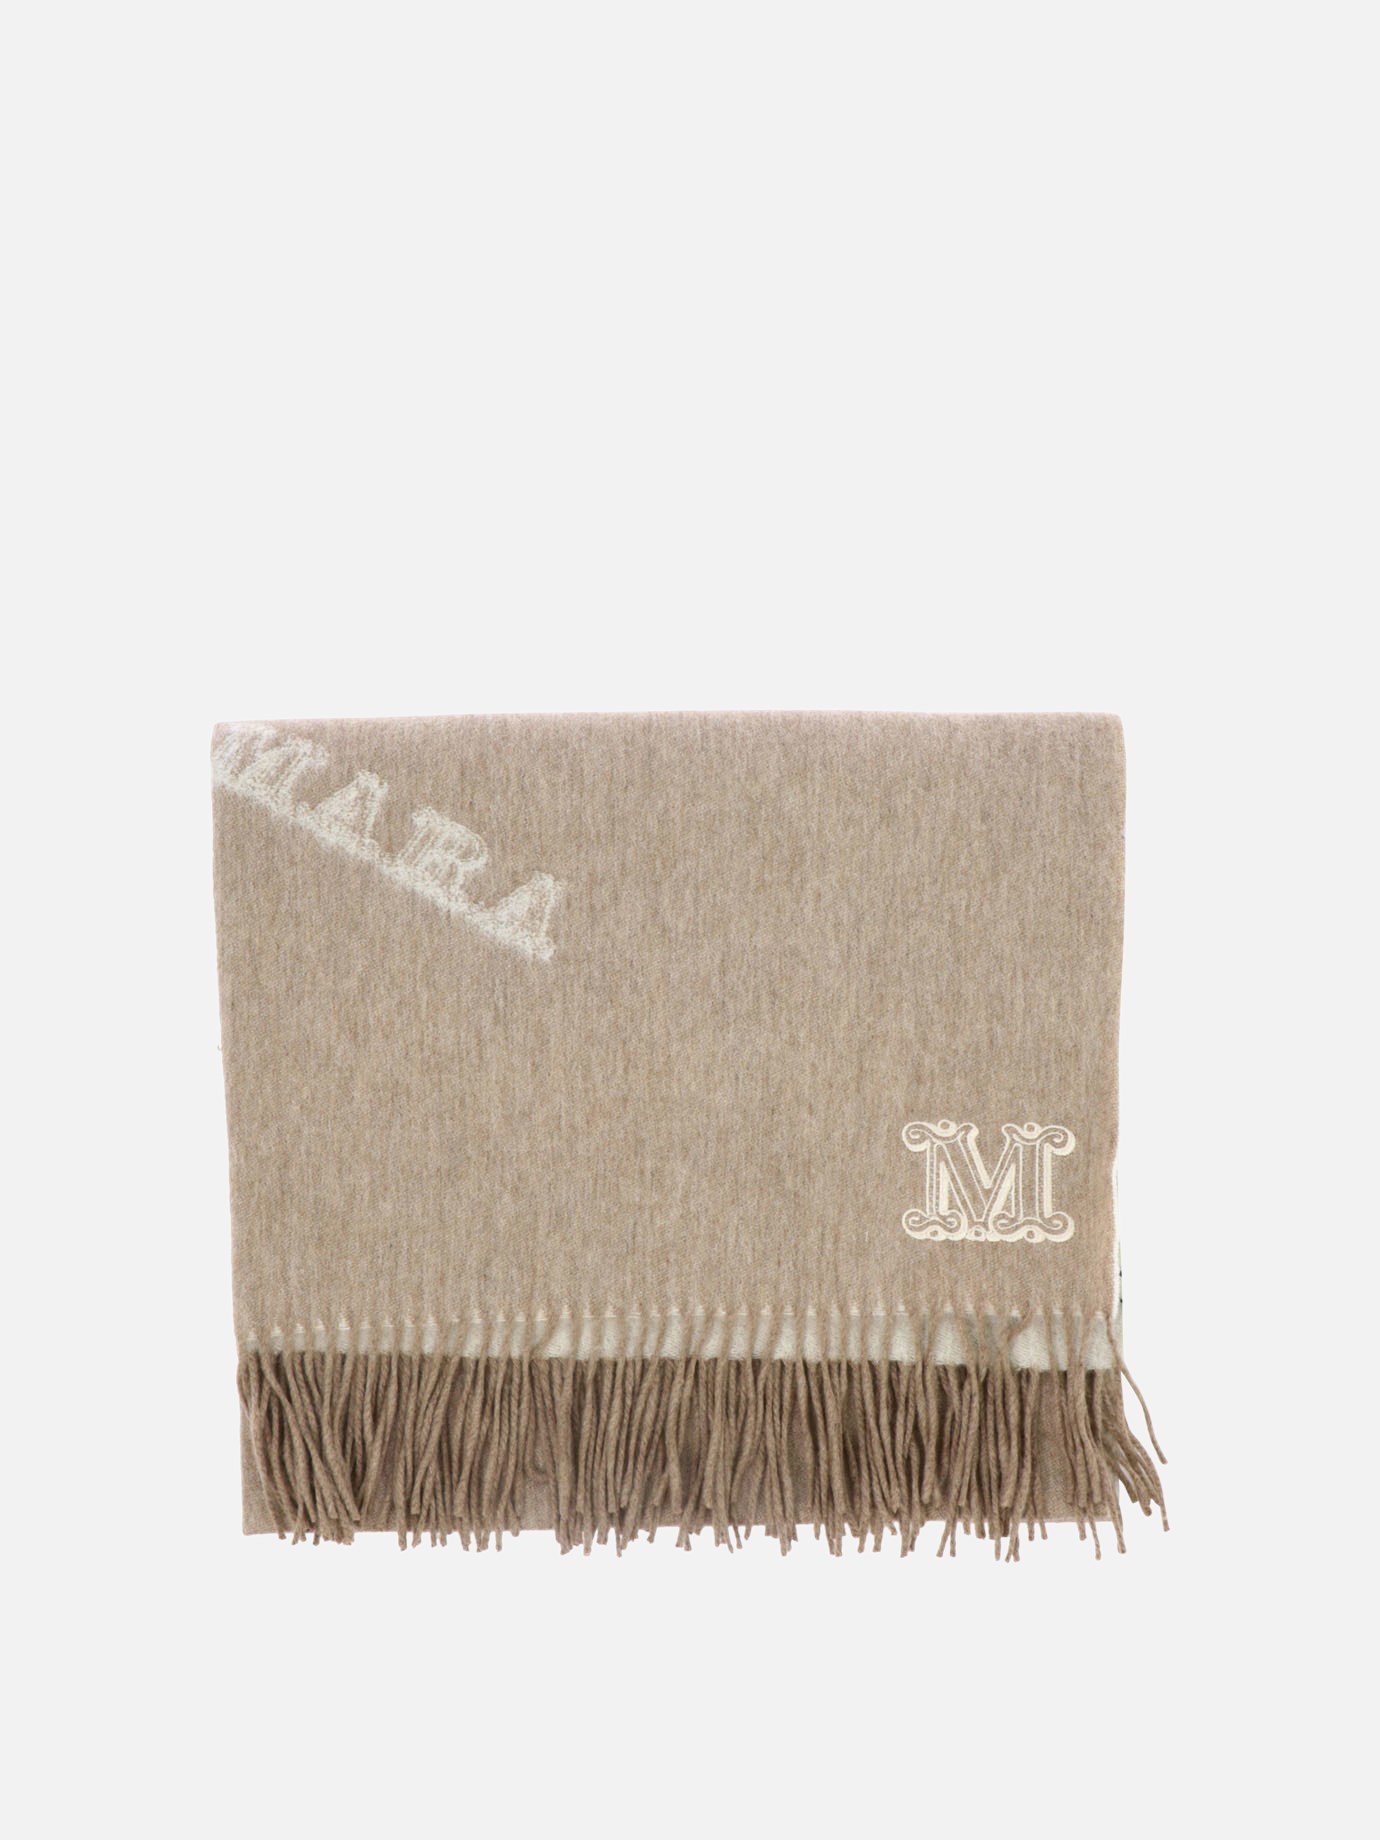  Wsklaus  scarfby Max Mara - 1